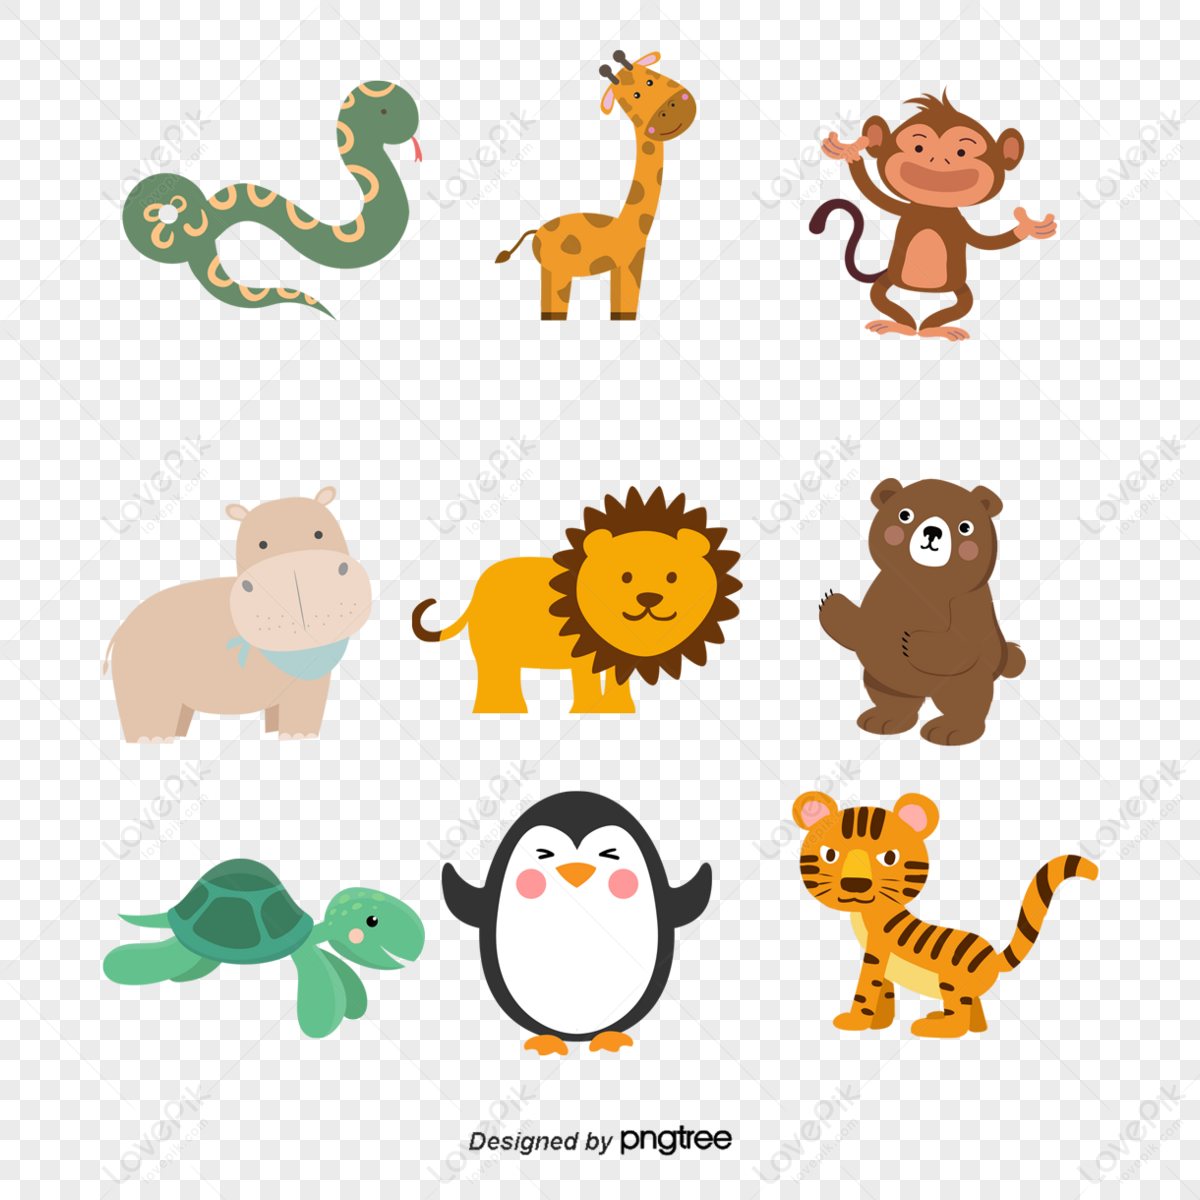 vector animals collection,aquatic,elephant,anime png transparent background